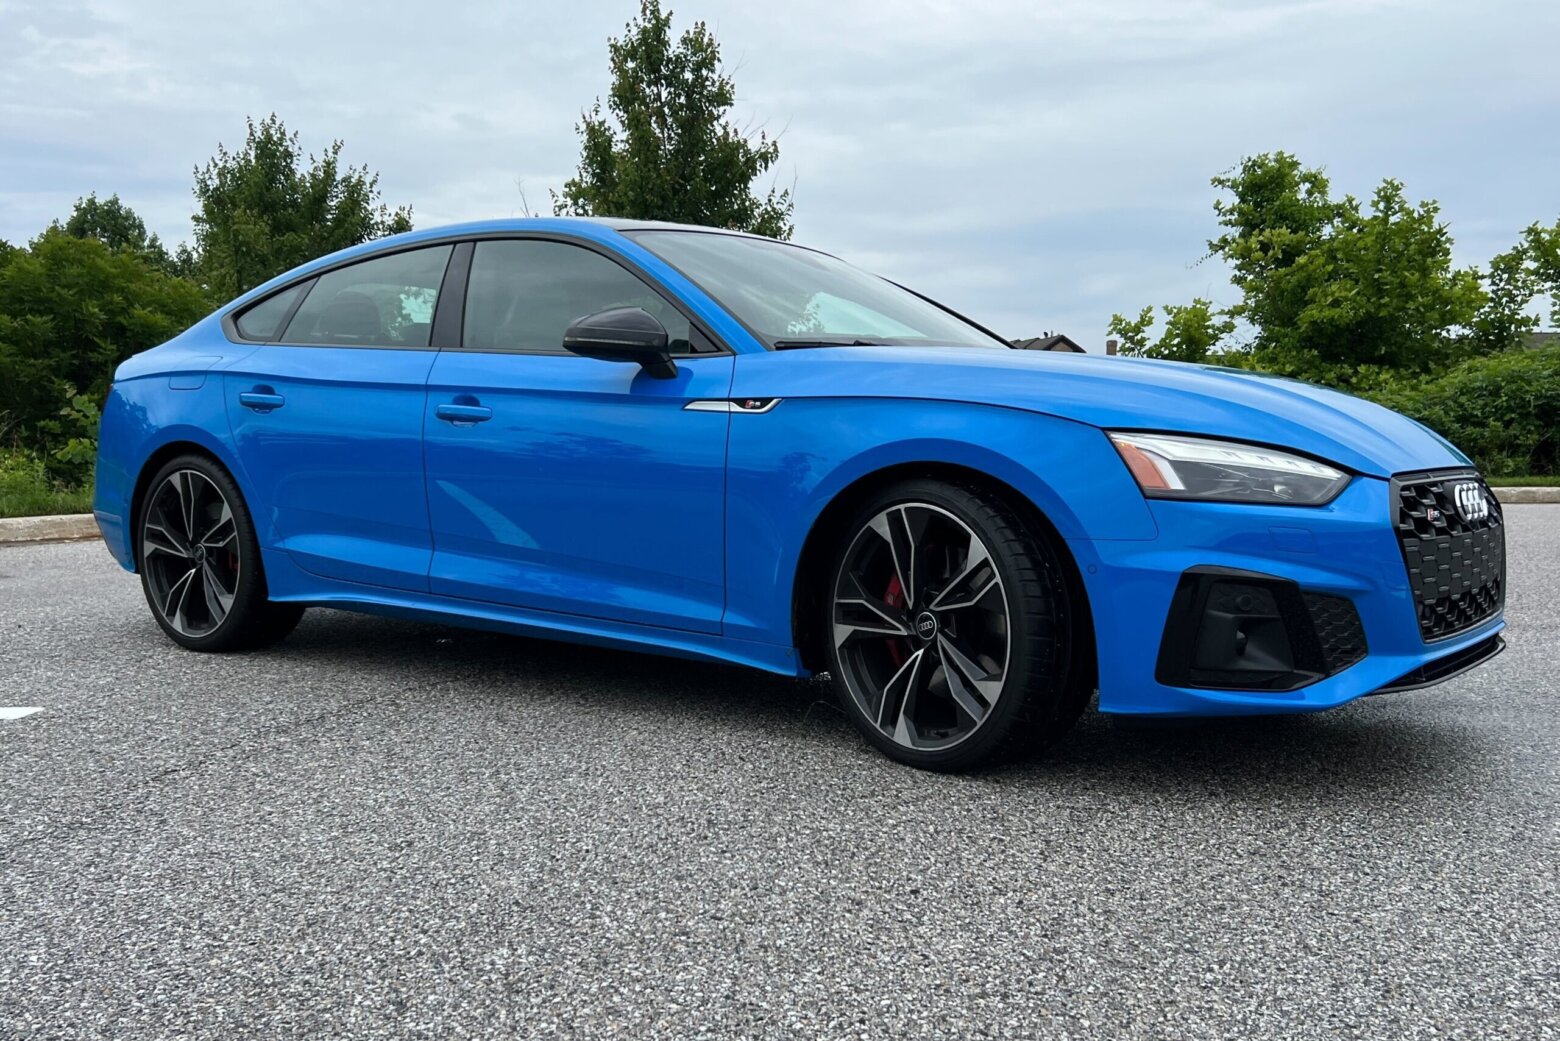 Car Review: Wanted an Audi S5 coupe but need more space? The S5 Sportback  will fill the need with space and style. - WTOP News